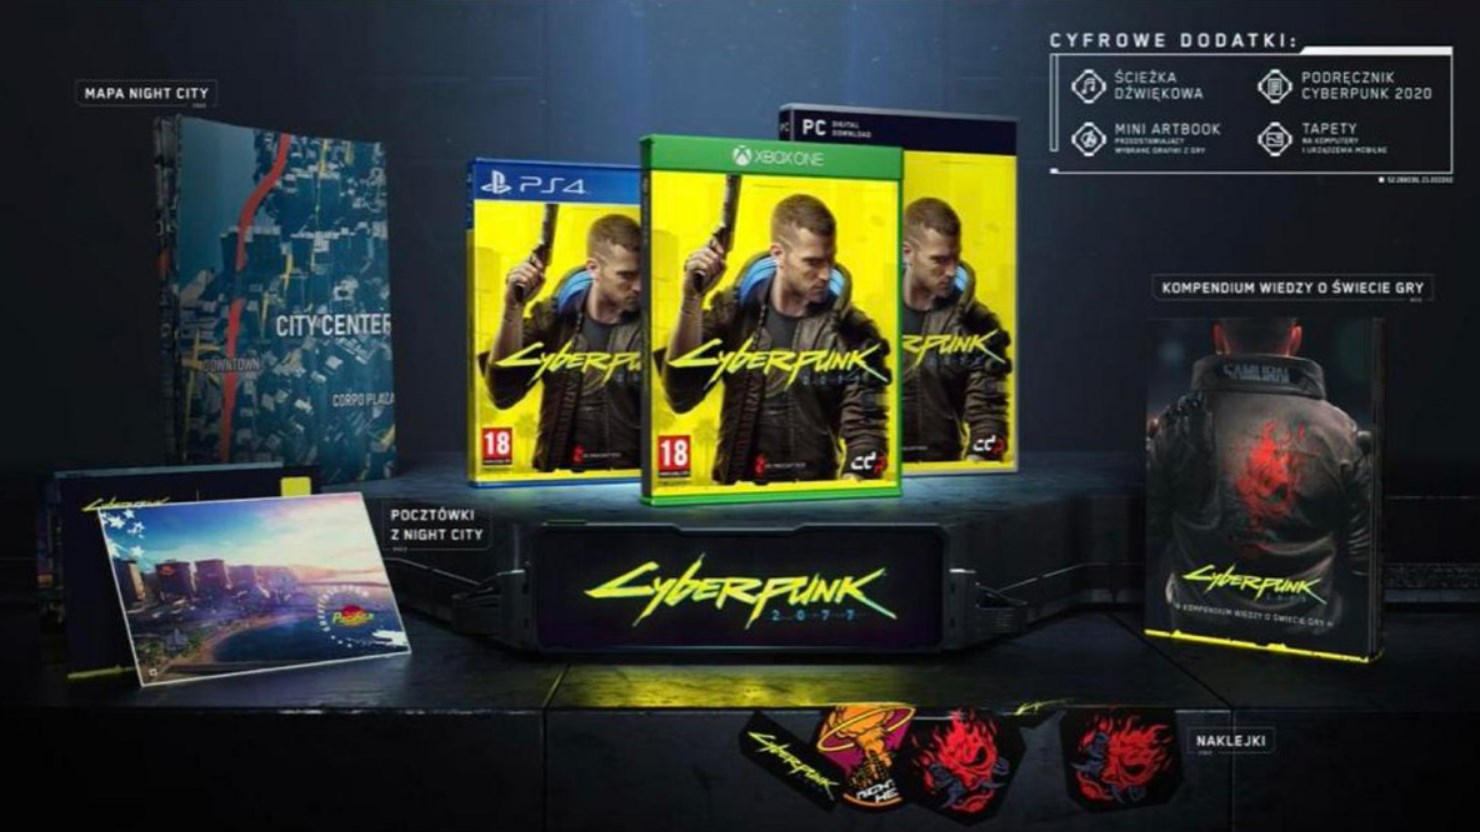 Cyberpunk 2077 Packaging Possibly Leaks Map Postcards Game